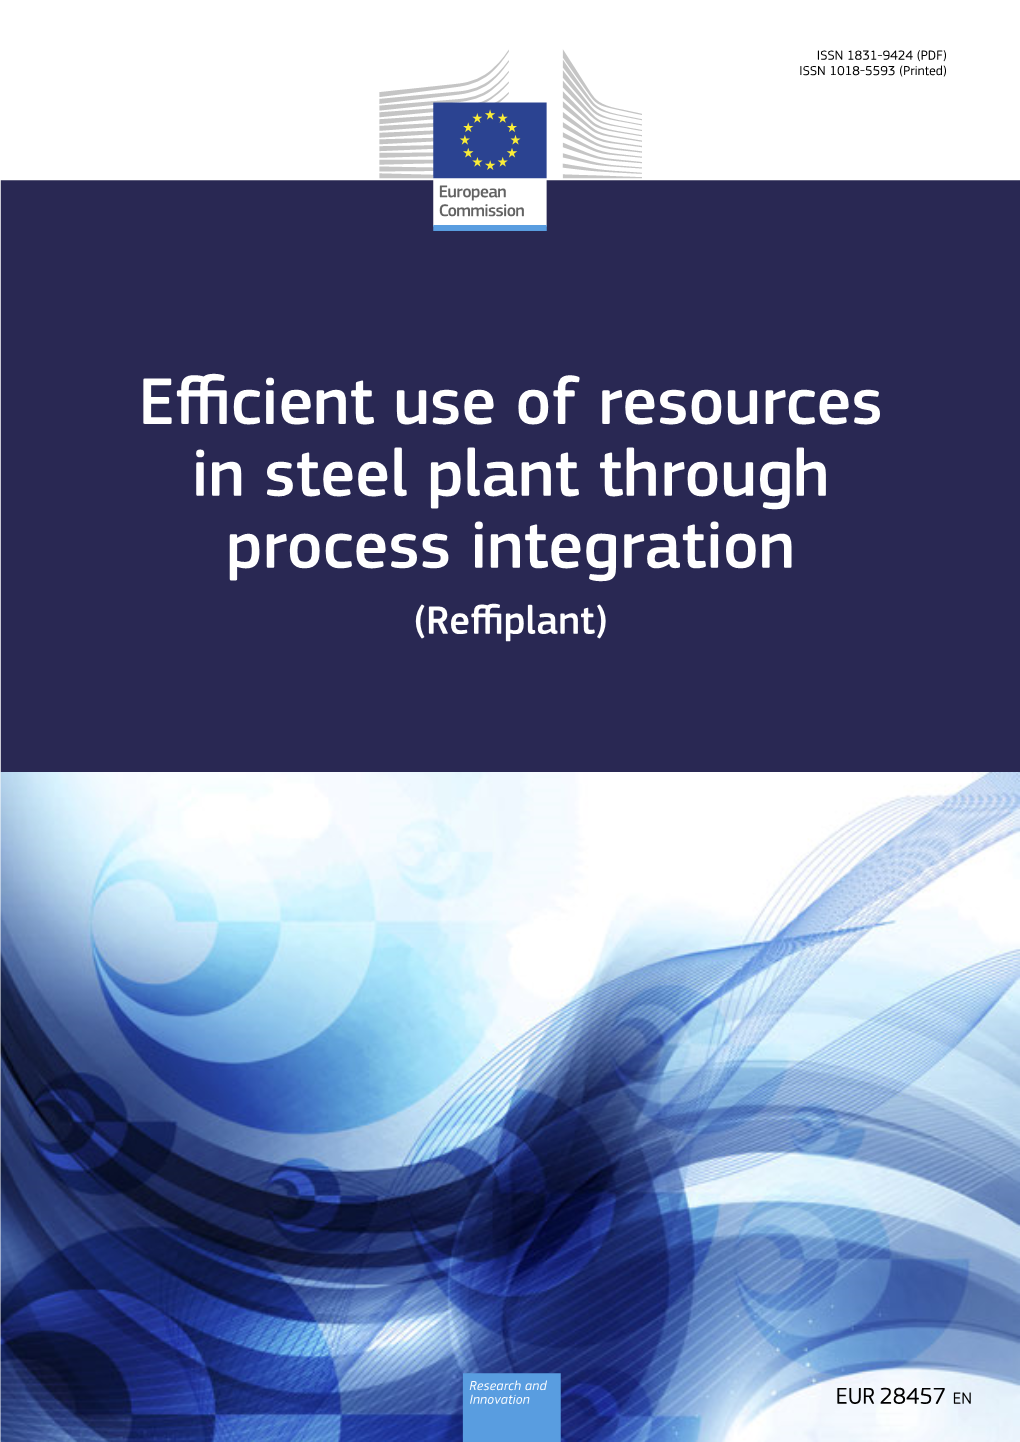 Efficient Use of Resources in Steel Plant Through Process Integration (Reffiplant) in Steel Plant Through Process Integration (Reffiplant) EUR 28457